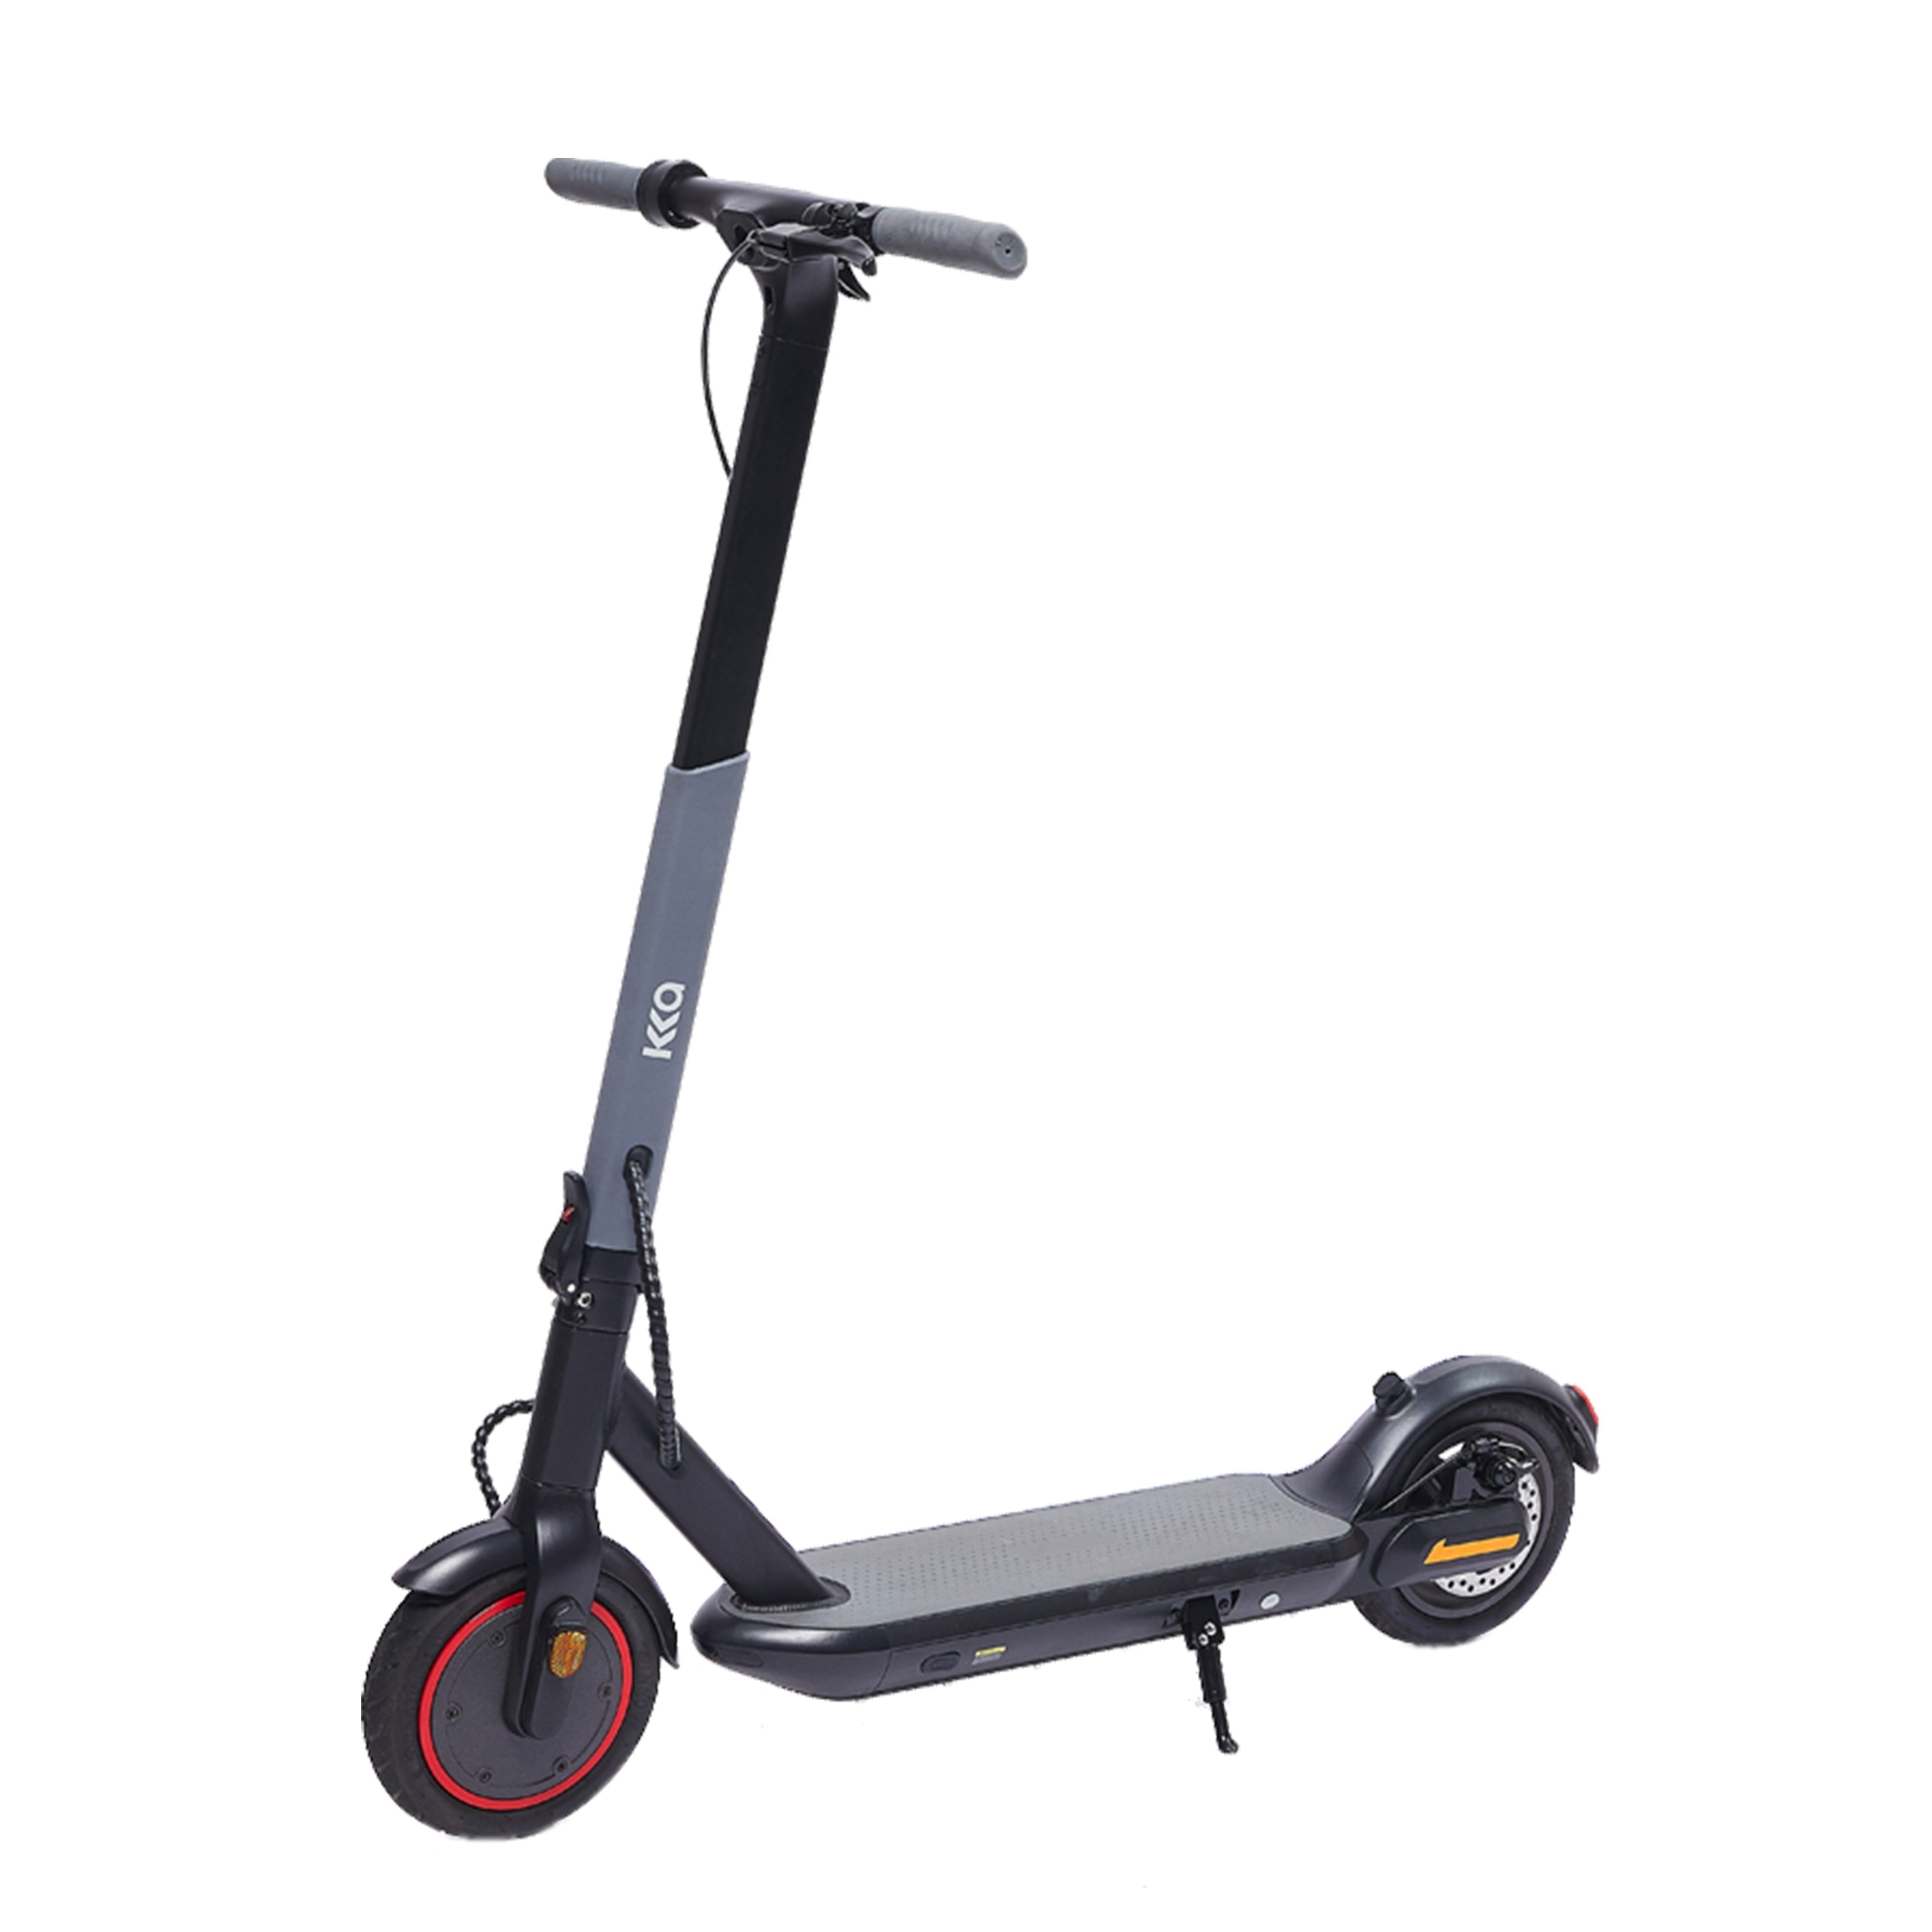 36V Freddo X1 E-Scooter. 350W motor, 16 mph, 8.5 inch tires, lightweight and foldable